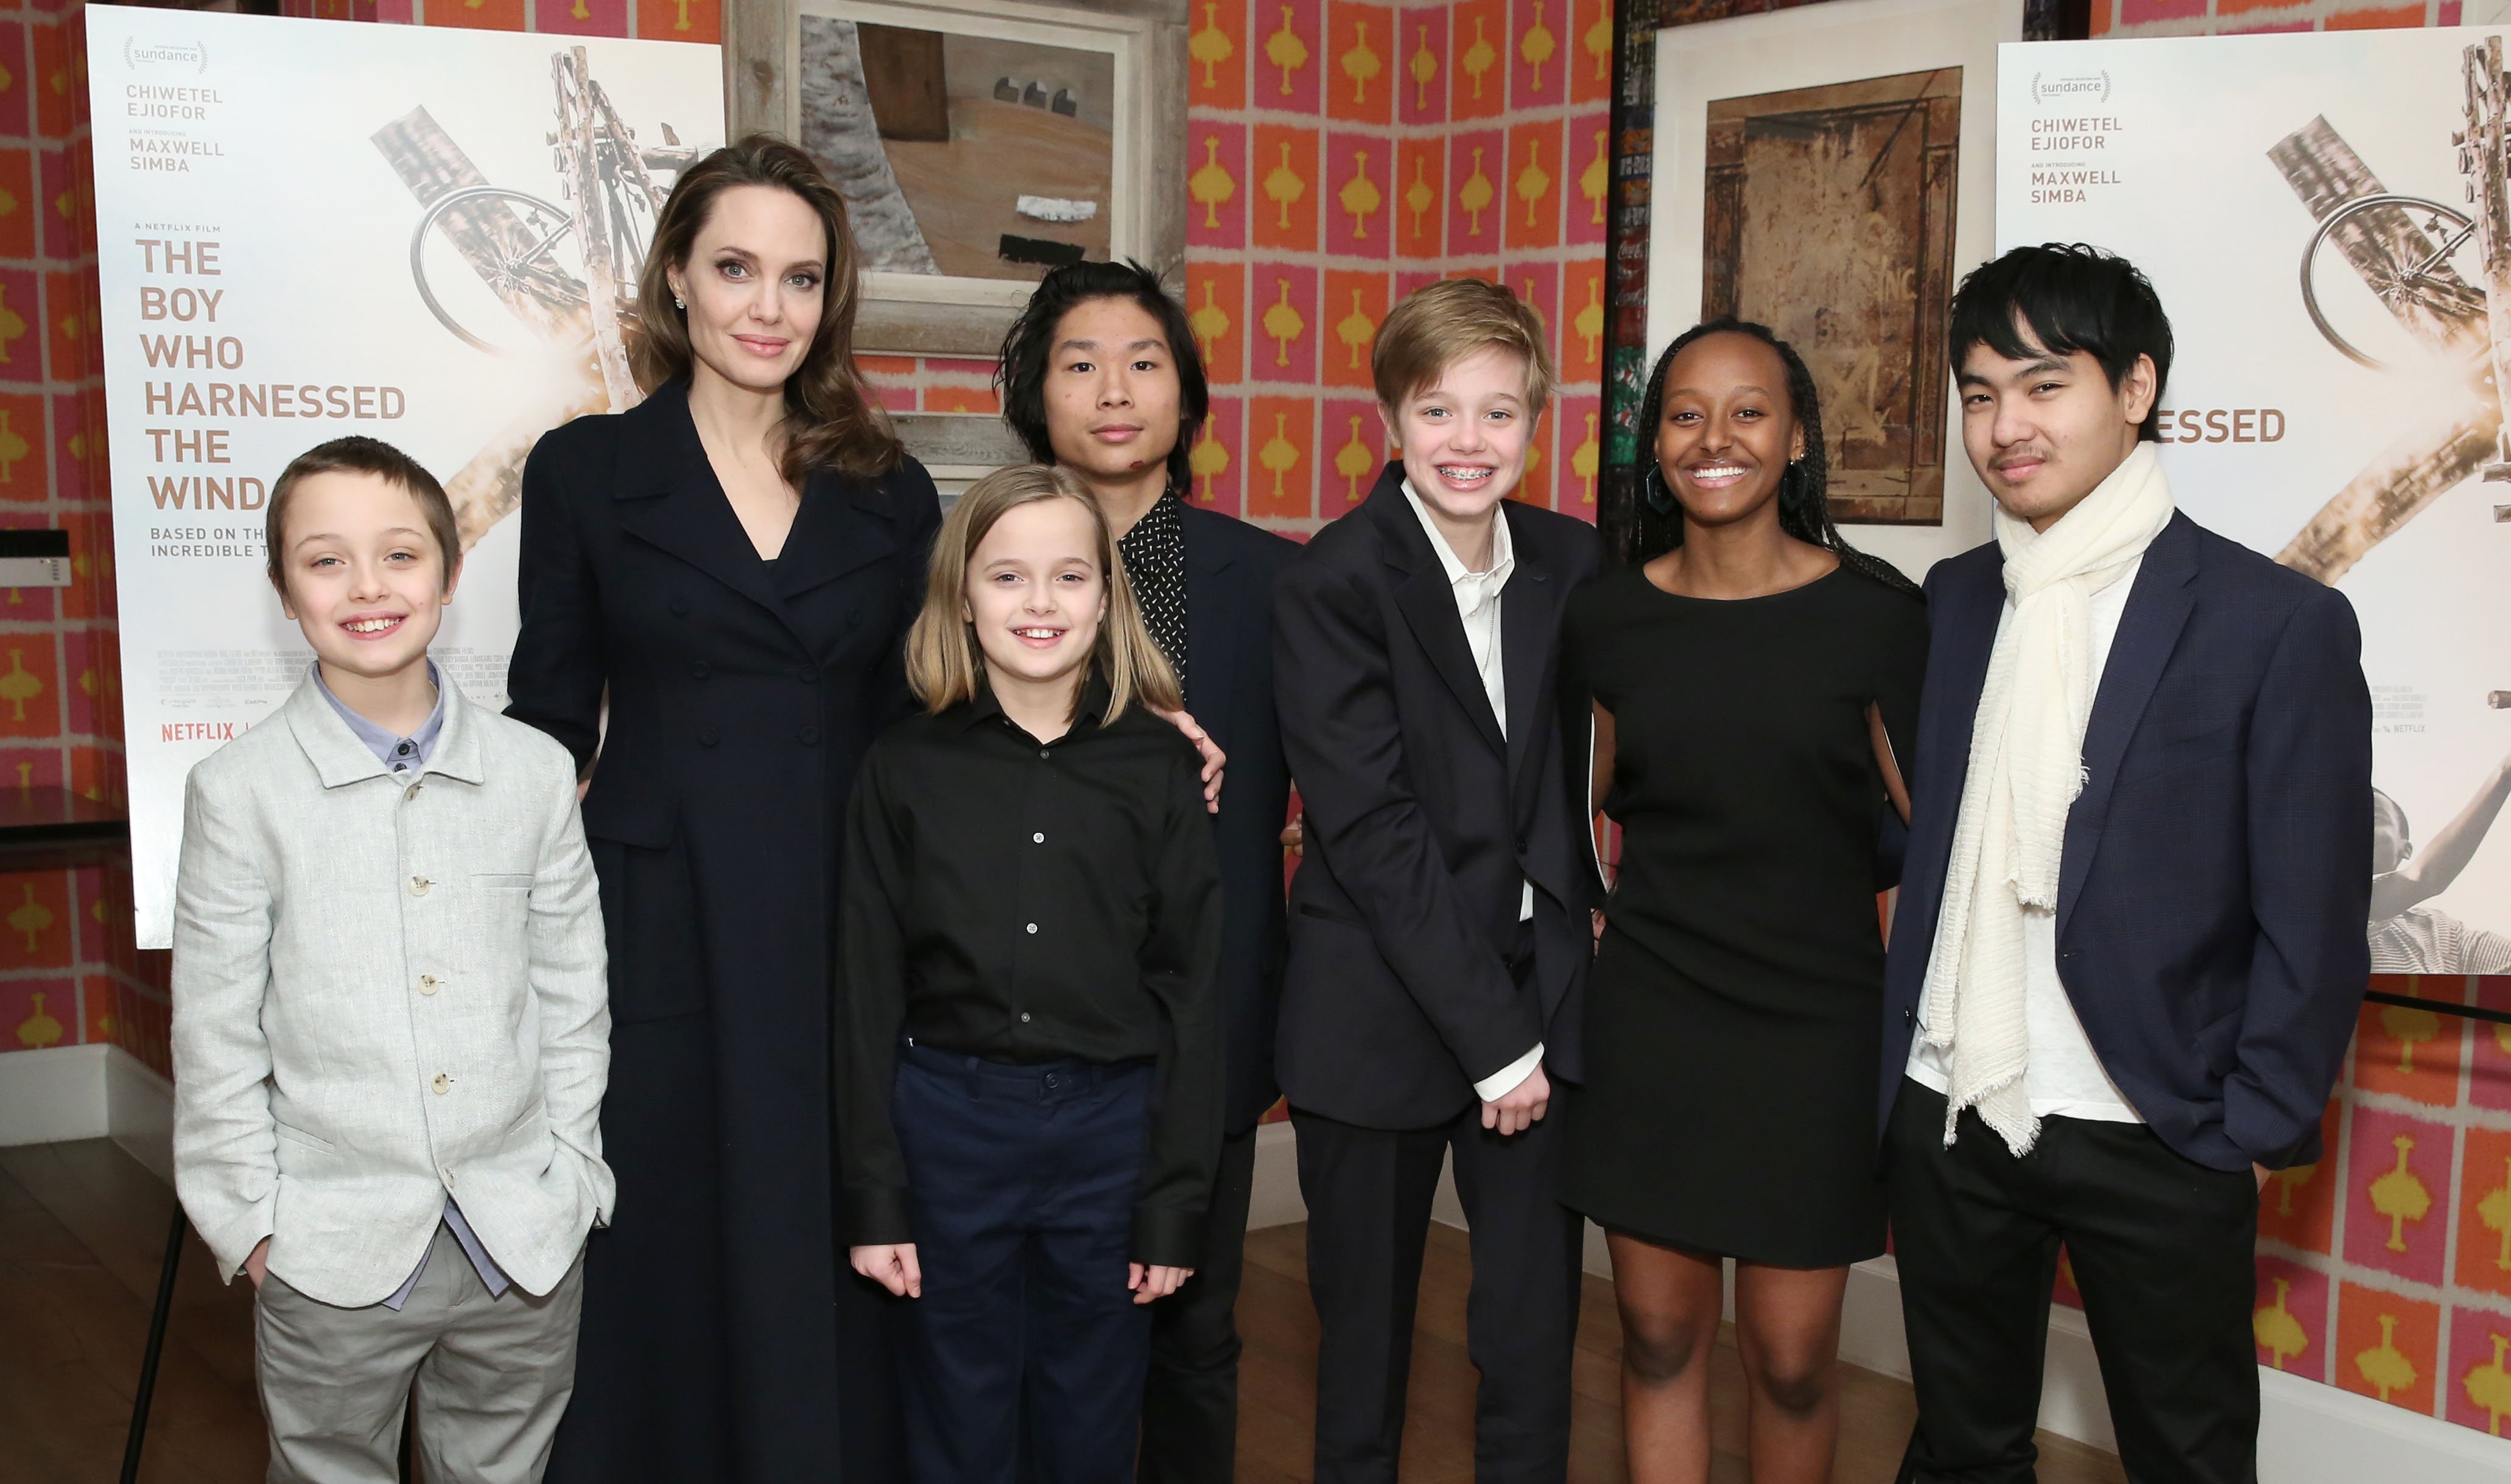 Angelina Jolie and her children attend a special screening of "The Boy Who Harnessed The Wind" in New York City on February 25, 2019 | Photo: Getty Images